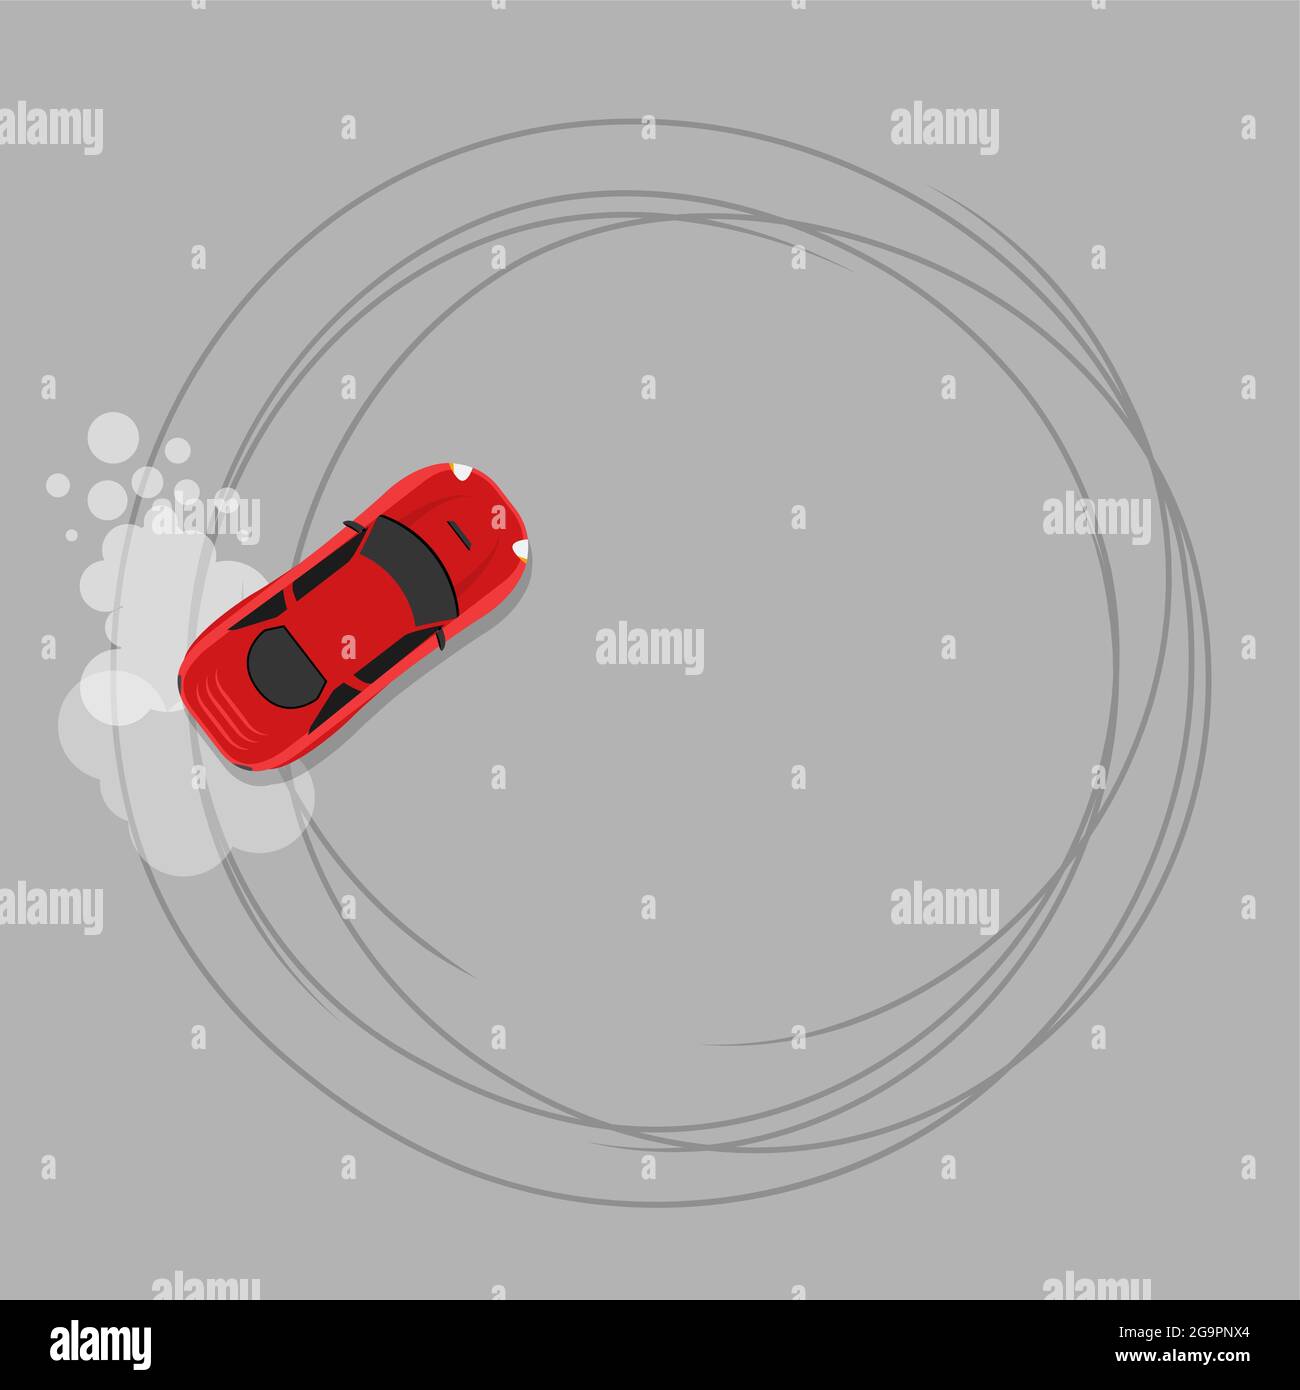 Drifting Car Images – Browse 5,639 Stock Photos, Vectors, and